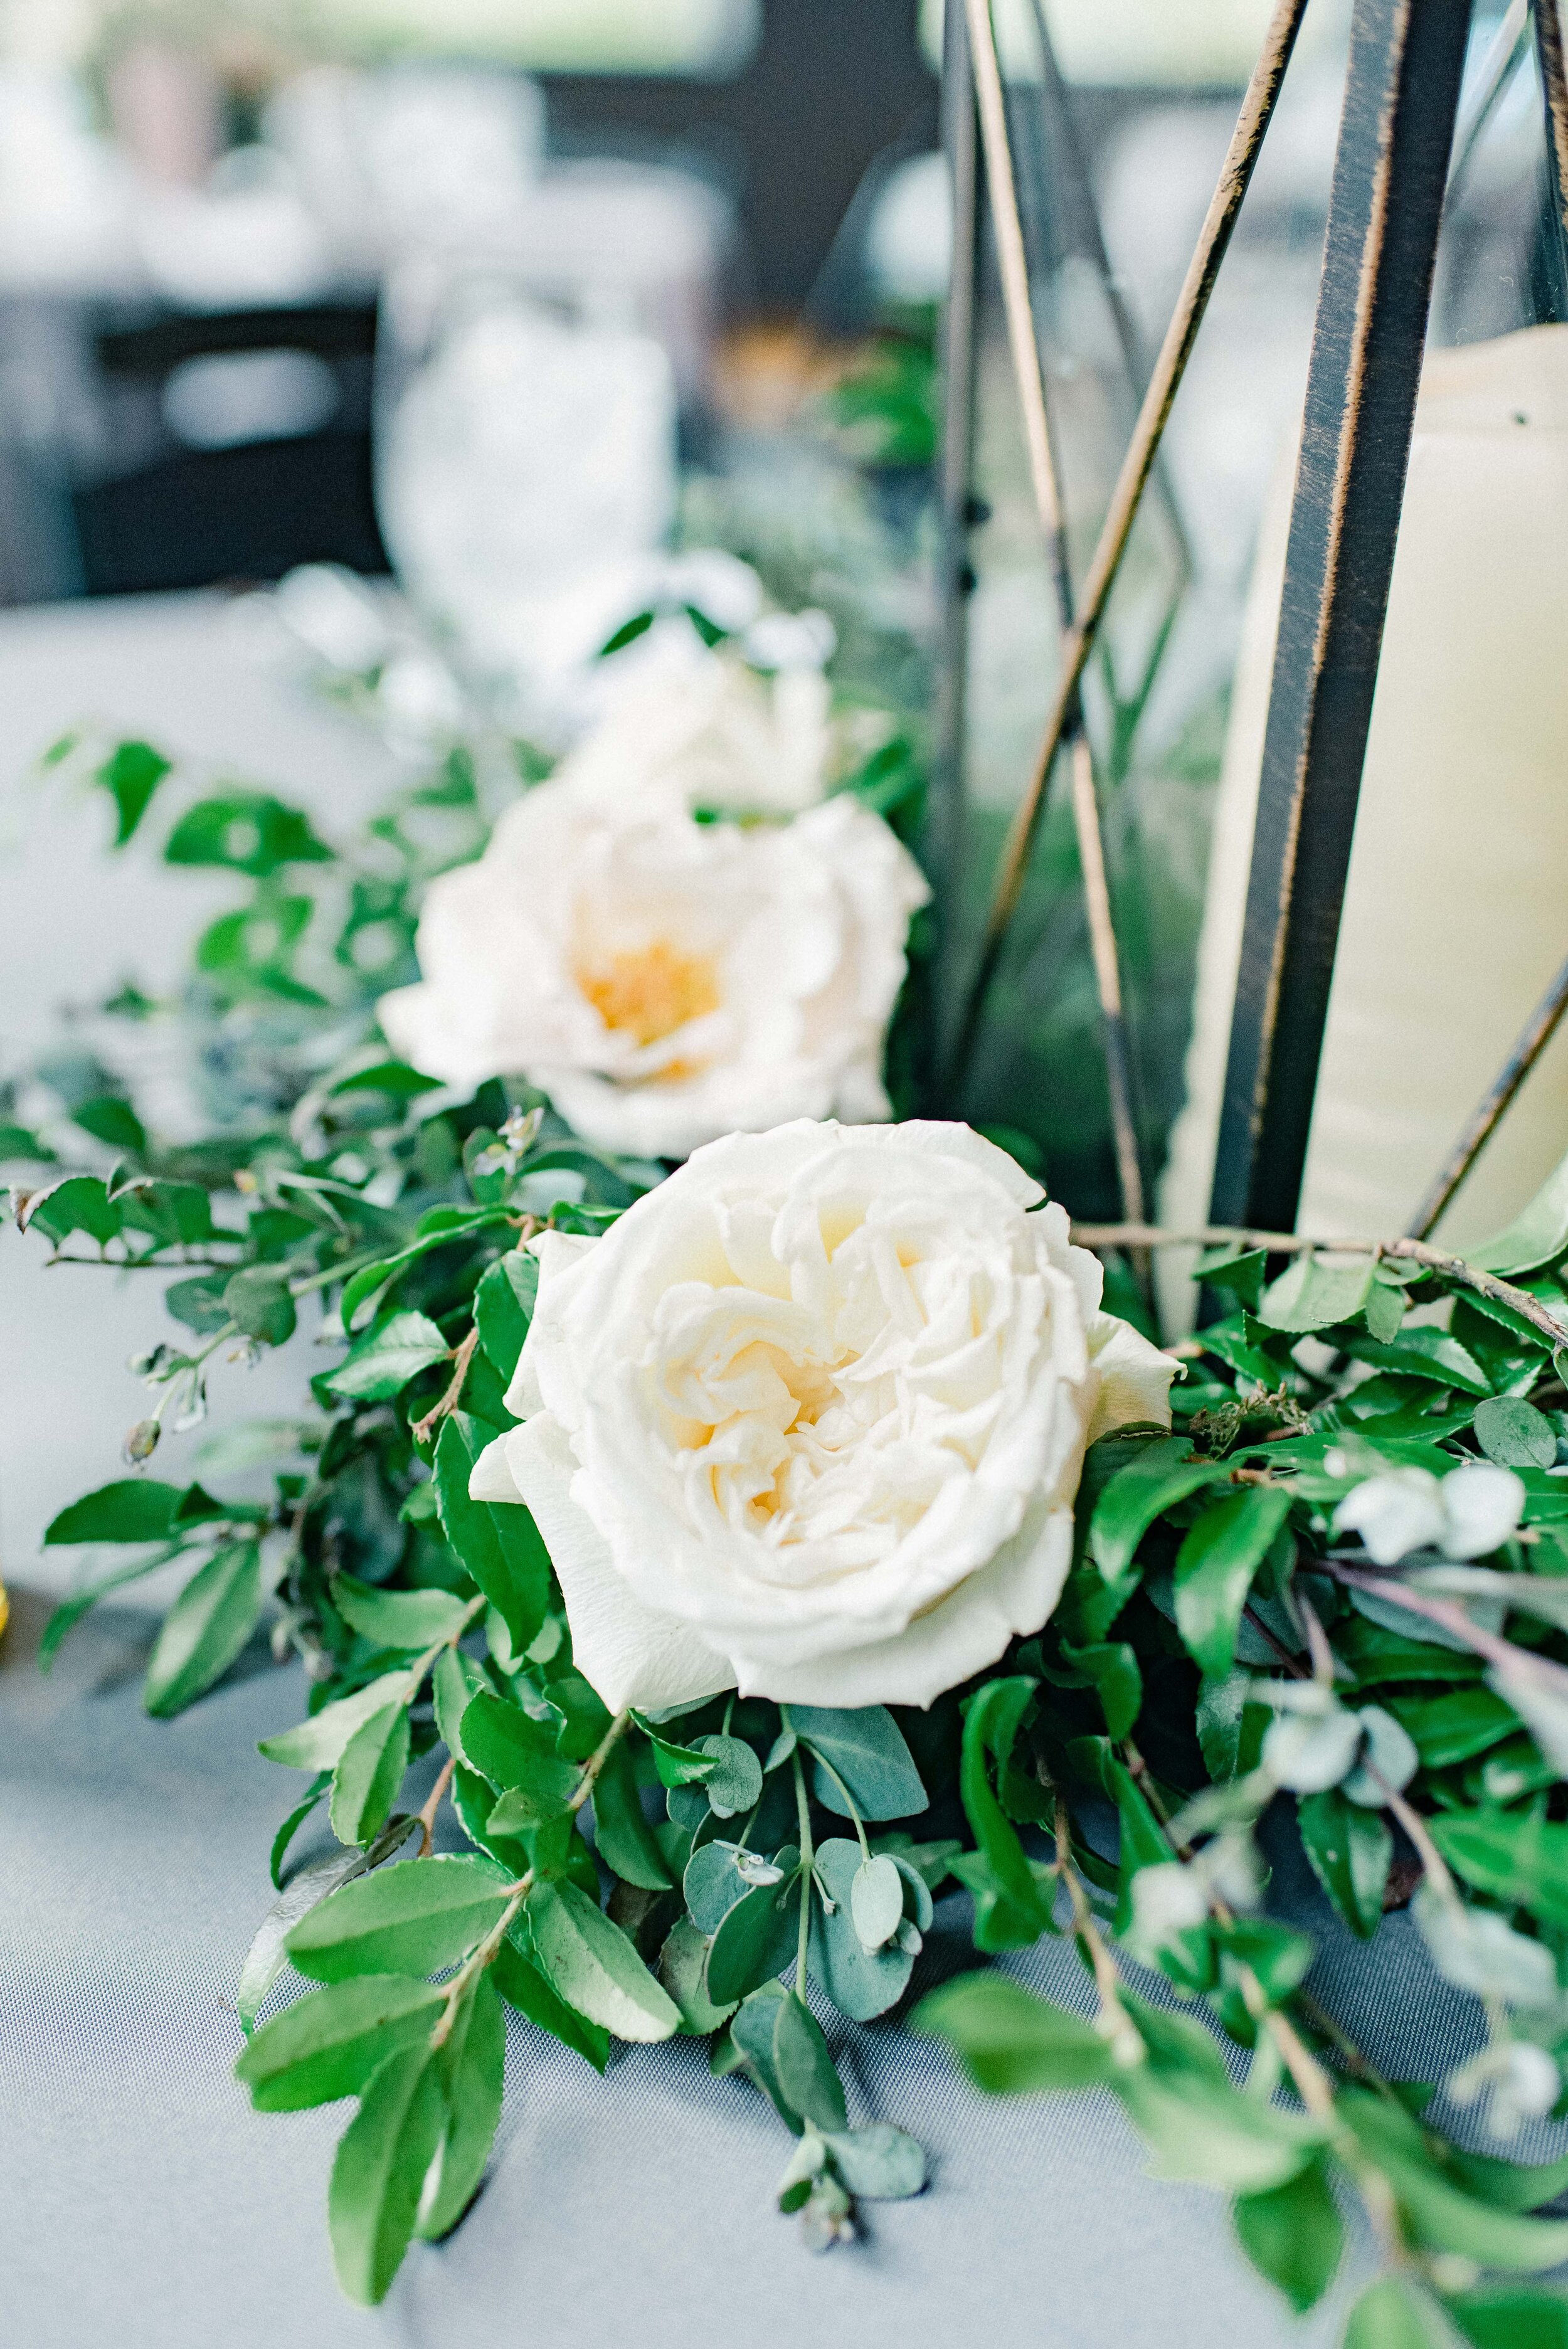 Table decor for this stunning wedding consisted of several different components. Round tables held lanterns adorned with blush and cream roses and lush greenery. Long, farm tables had garlands of eucalyptus and twinkling candles. Centerpieces filled…